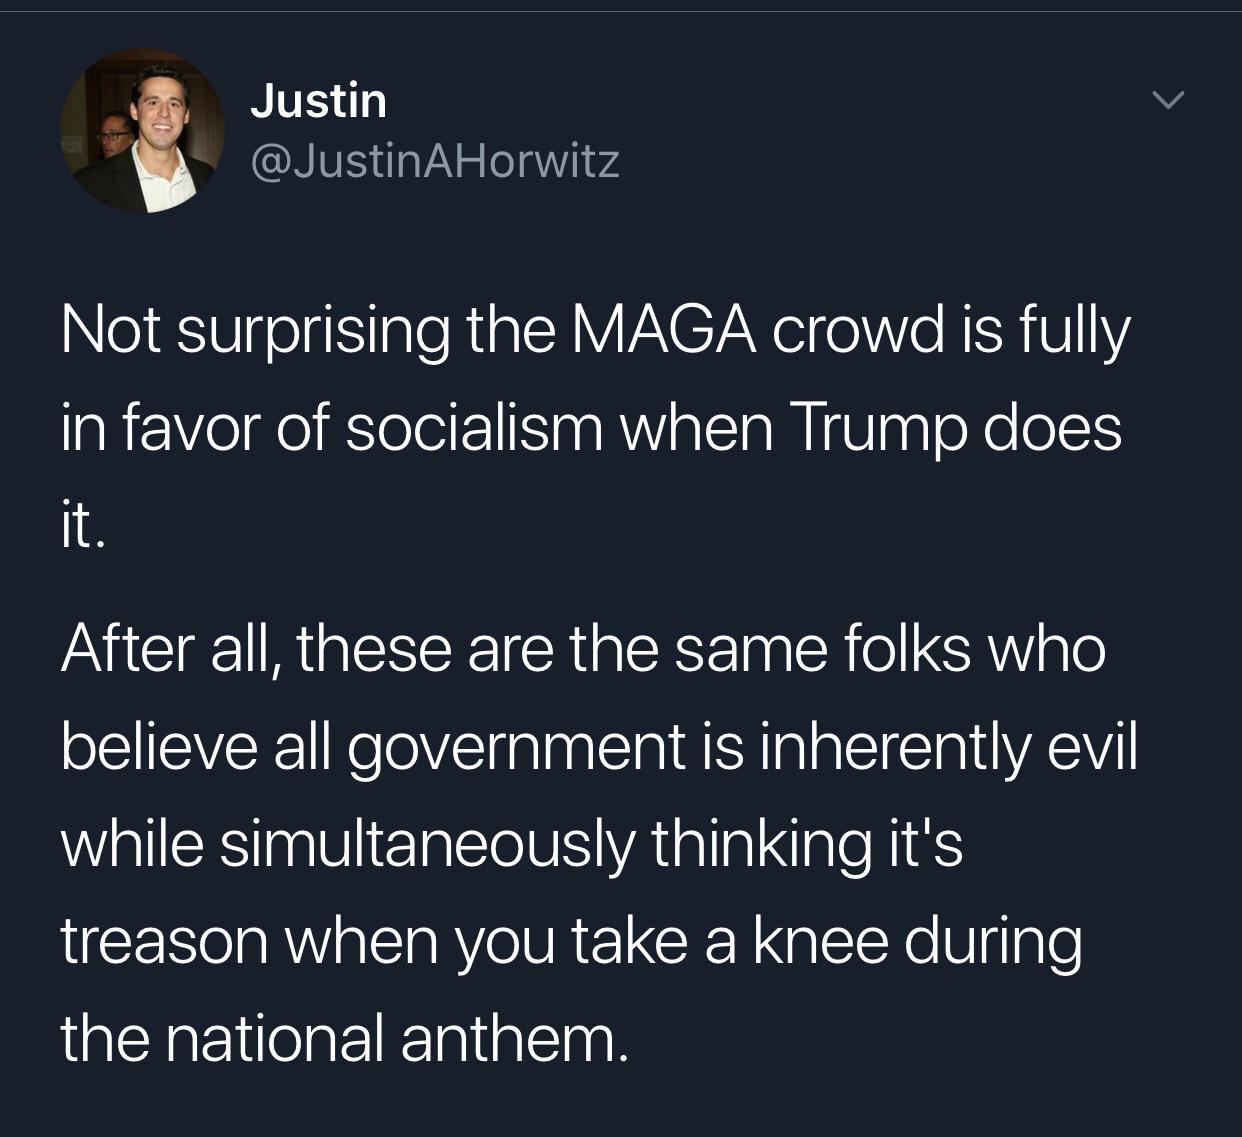 presentation - Justin AHorwitz Not surprising the Maga crowd is fully in favor of socialism when Trump does After all, these are the same folks who believe all government is inherently evil while simultaneously thinking it's treason when you take a knee d